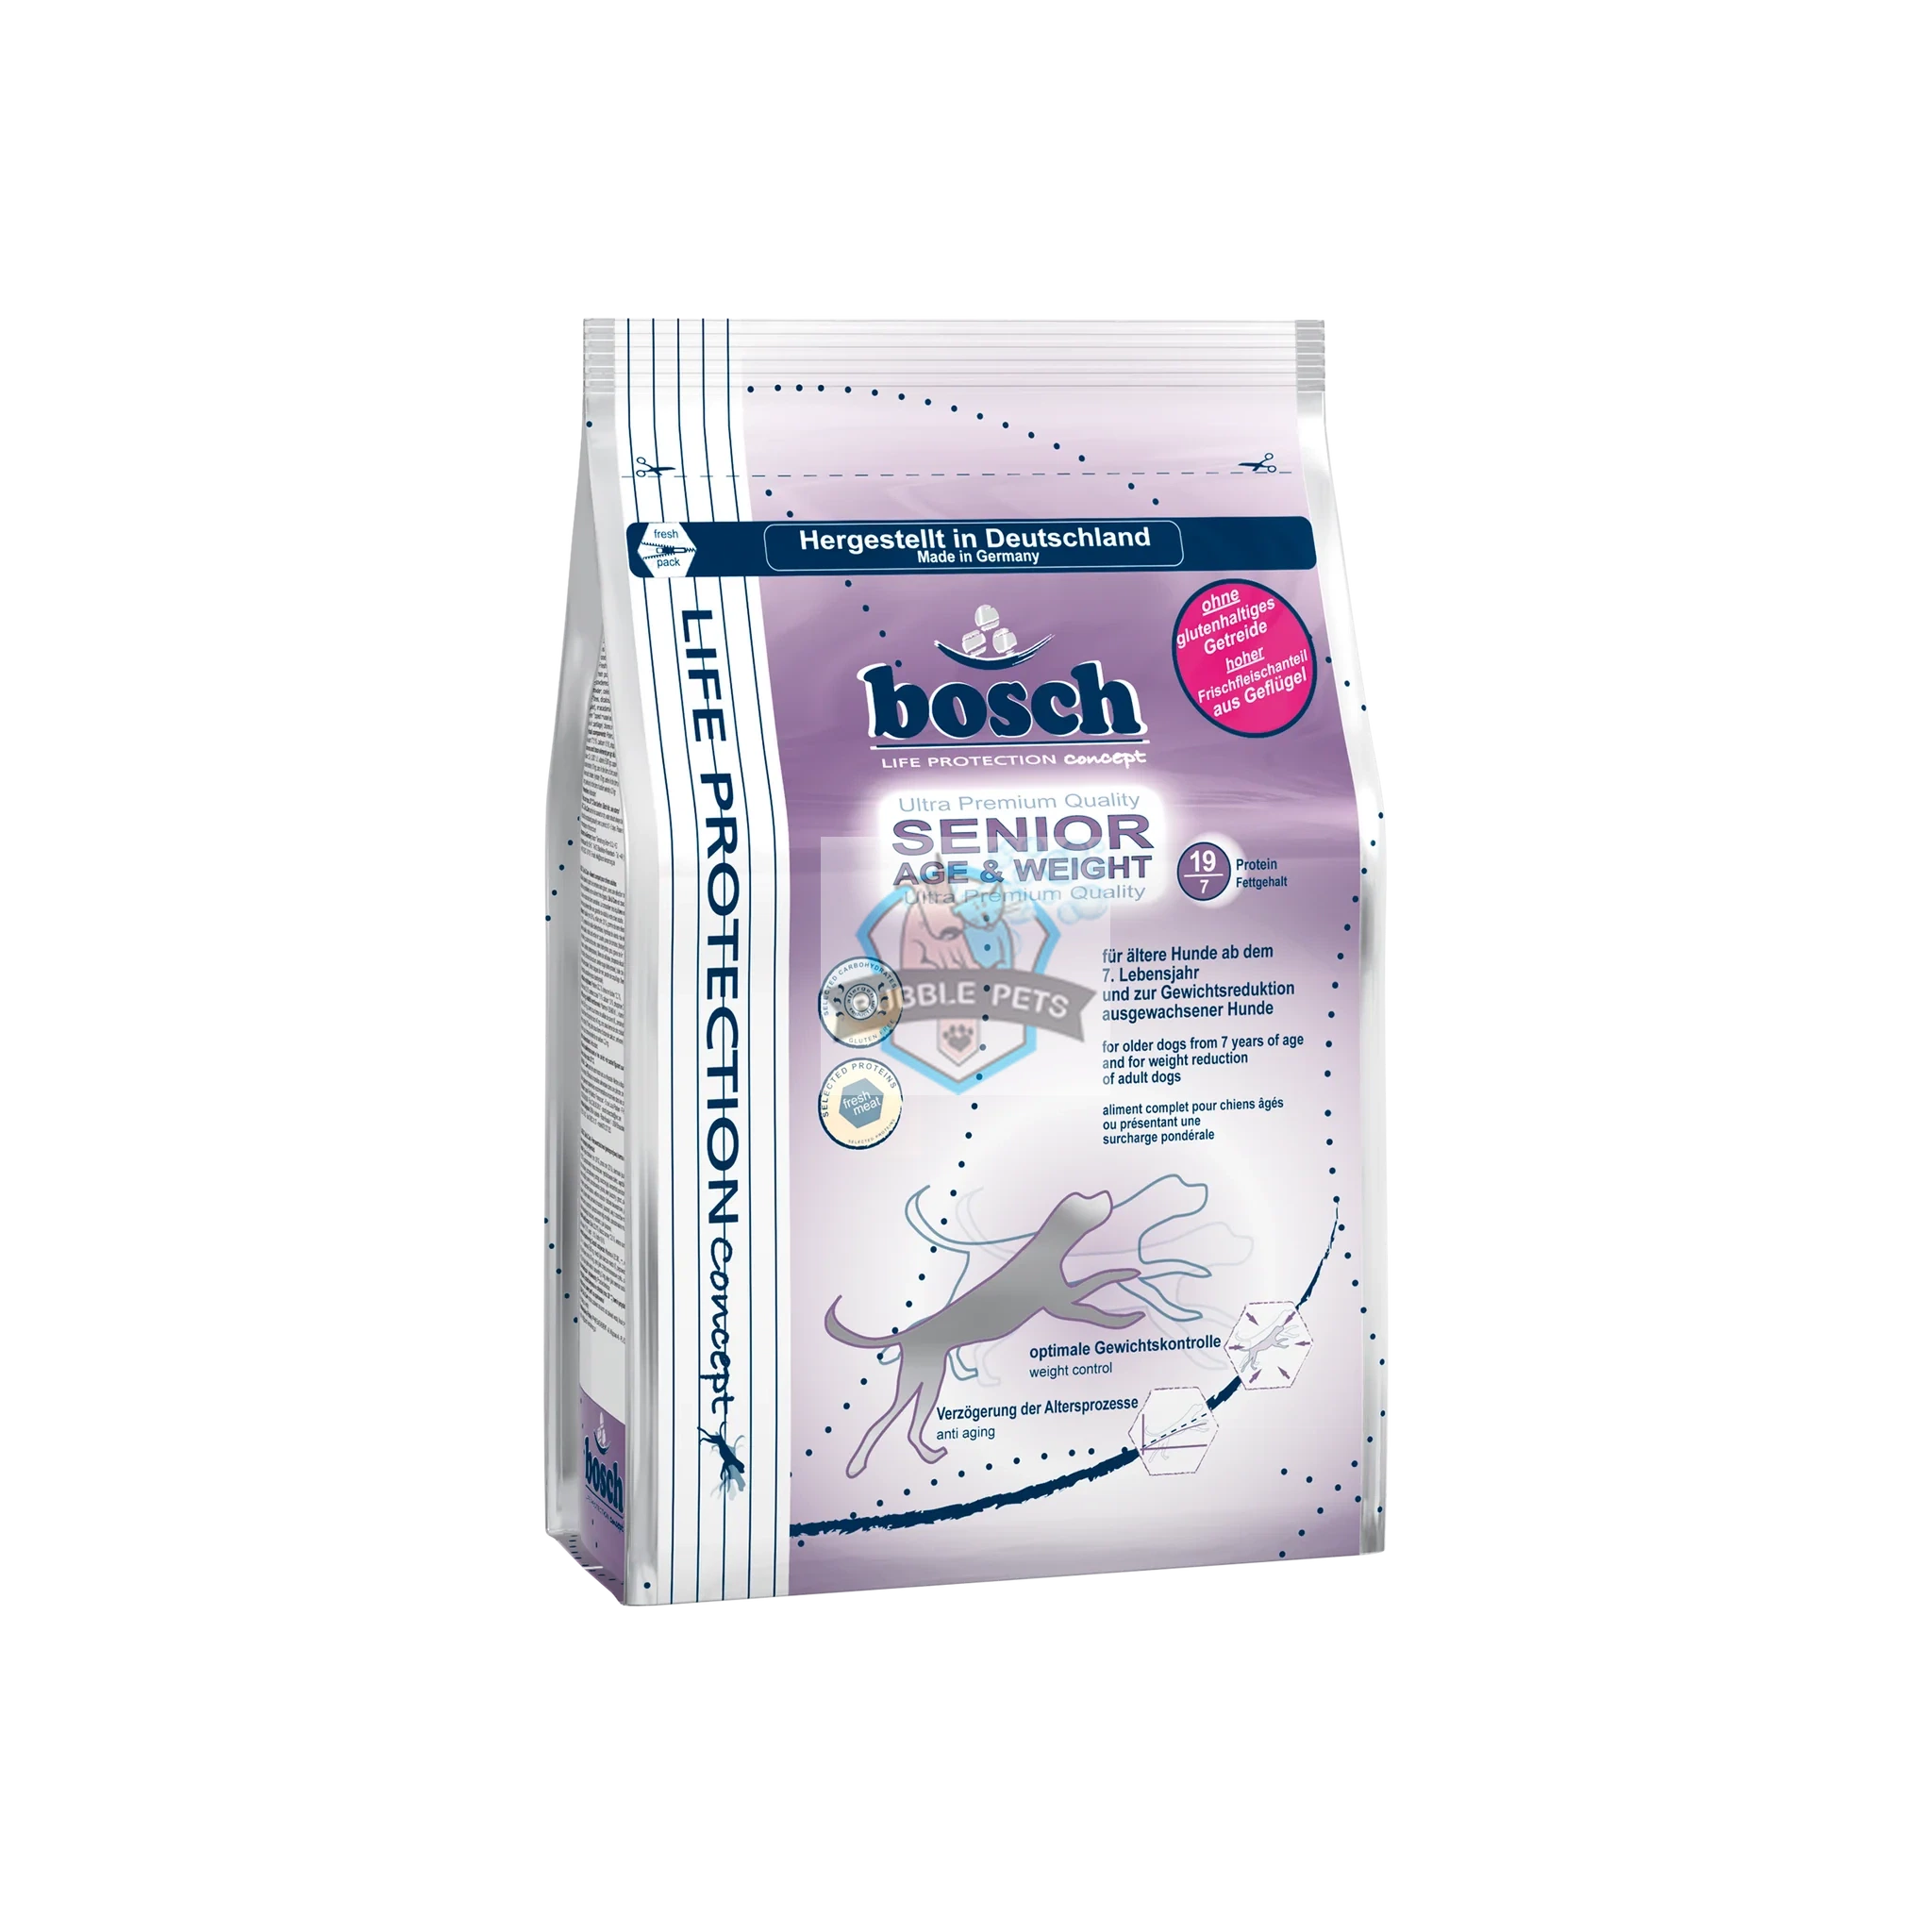 Bosch High Protection Senior Age and Weight Dog Food